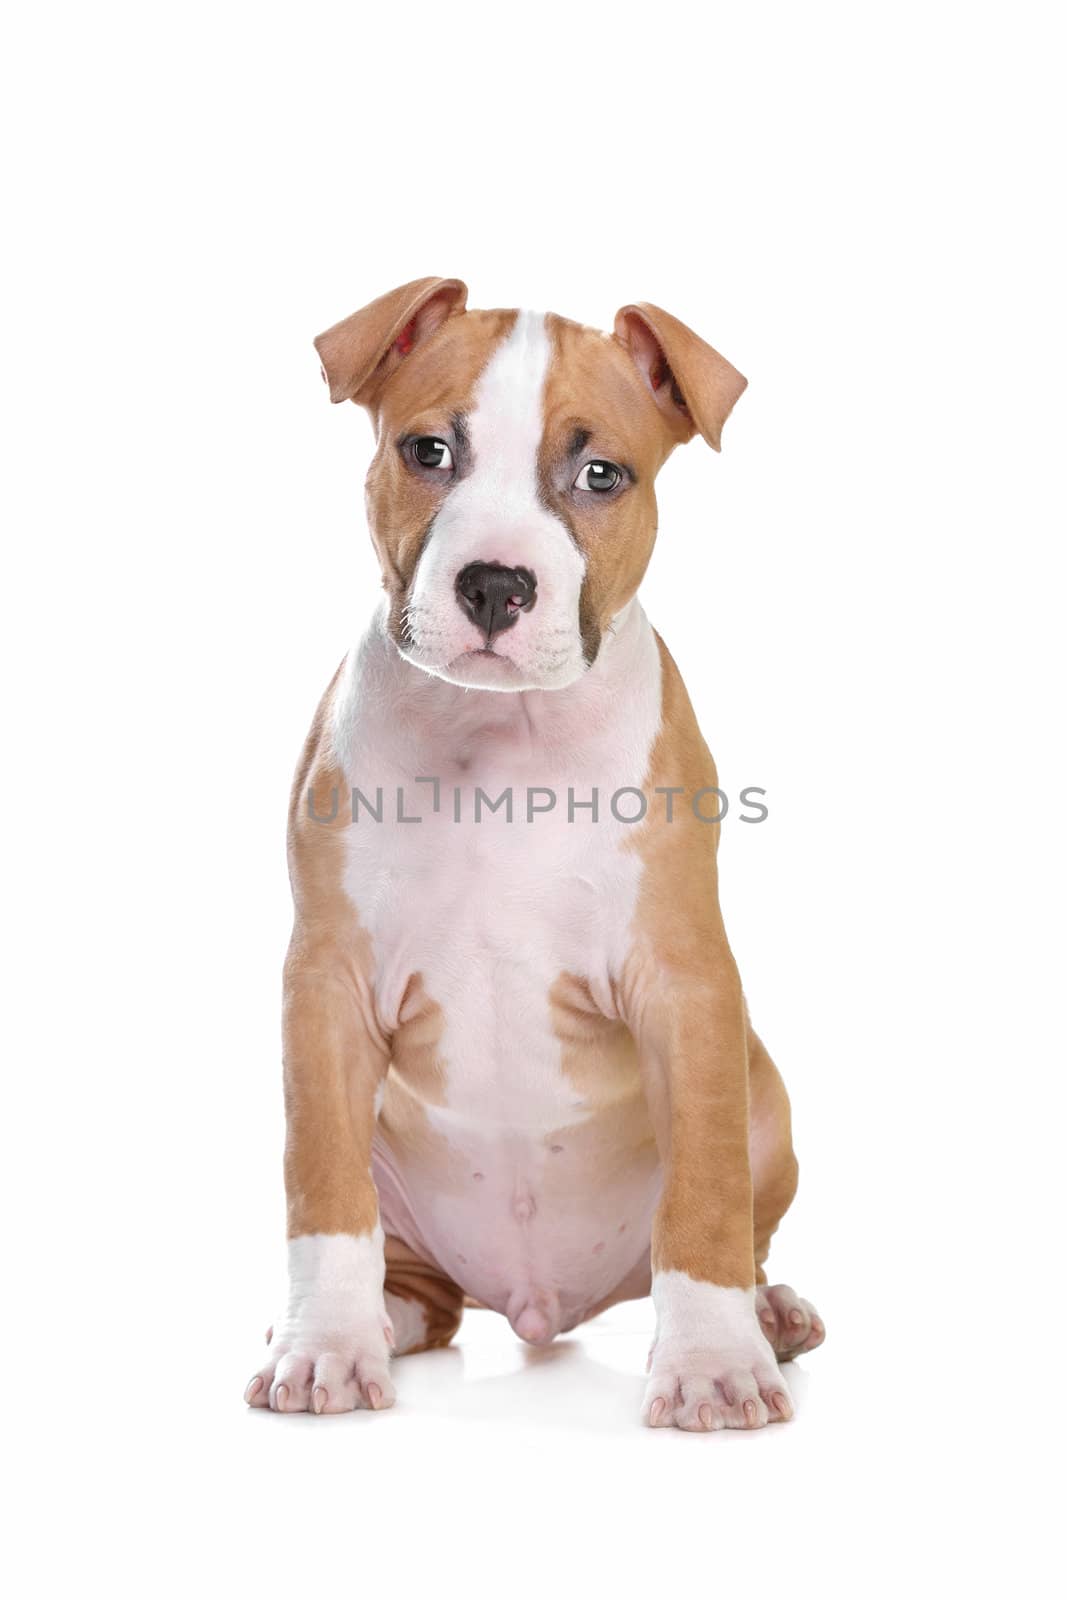 American Staffordshire Terrier pup in front of white